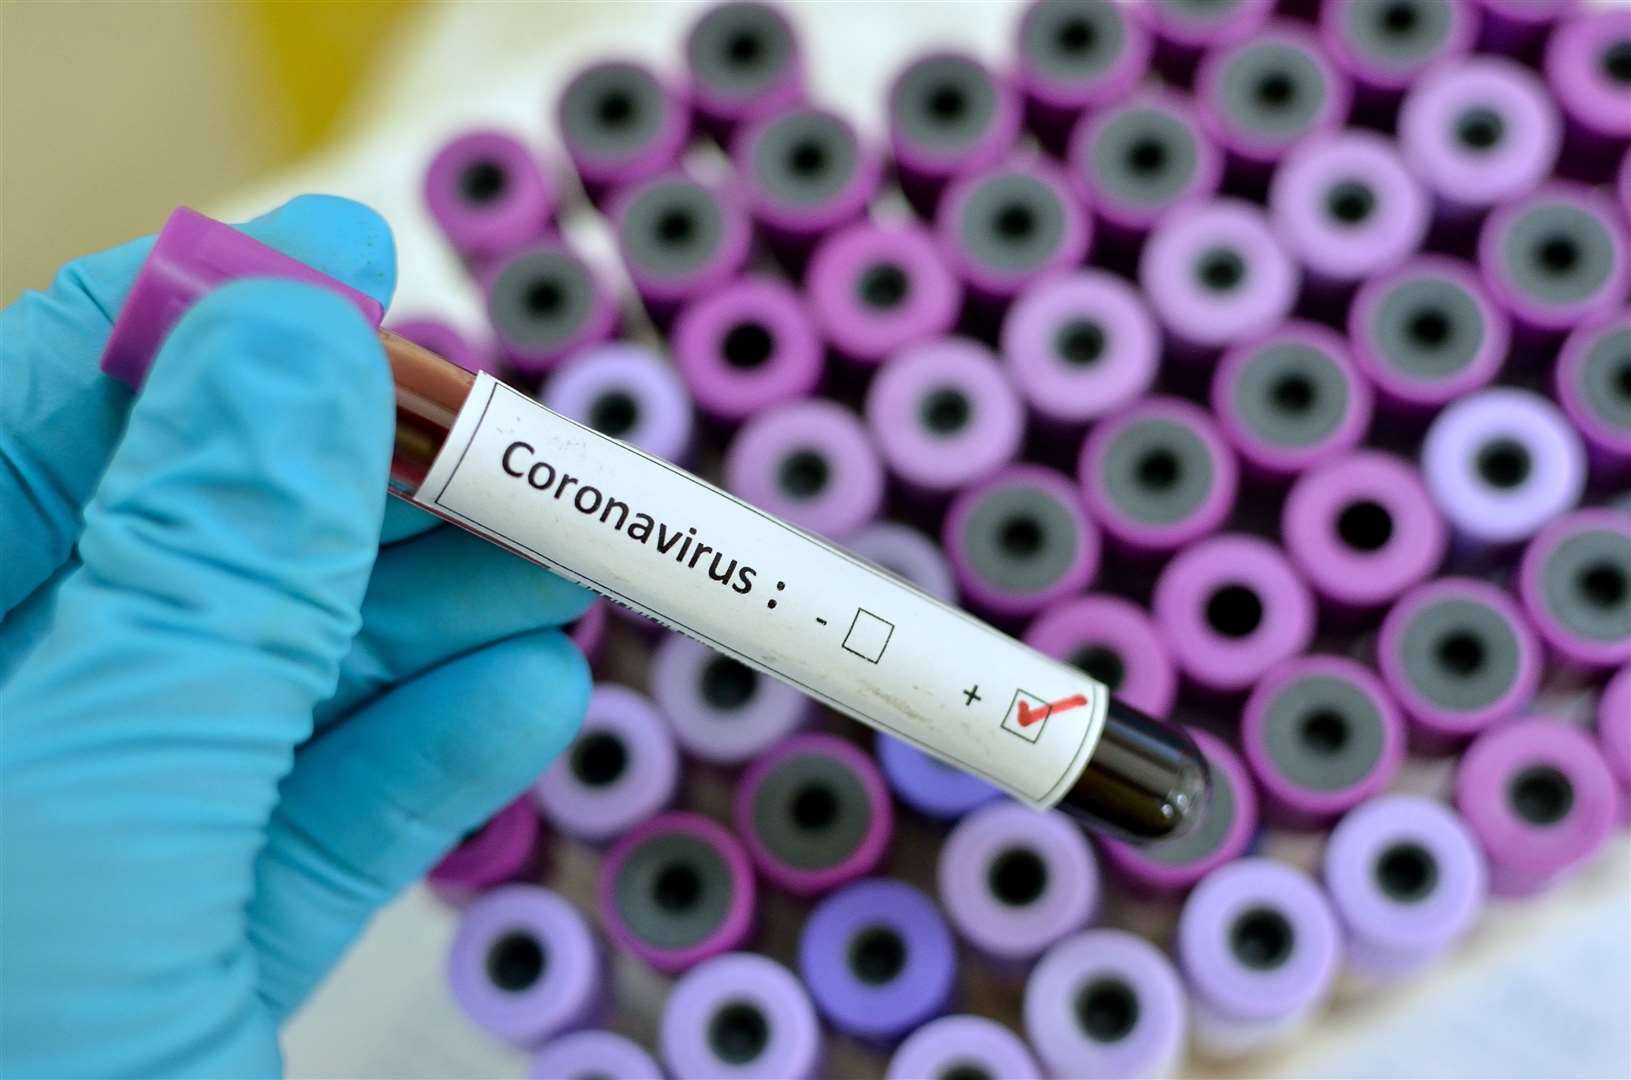 Kent's was said to have a second case of coronavirus